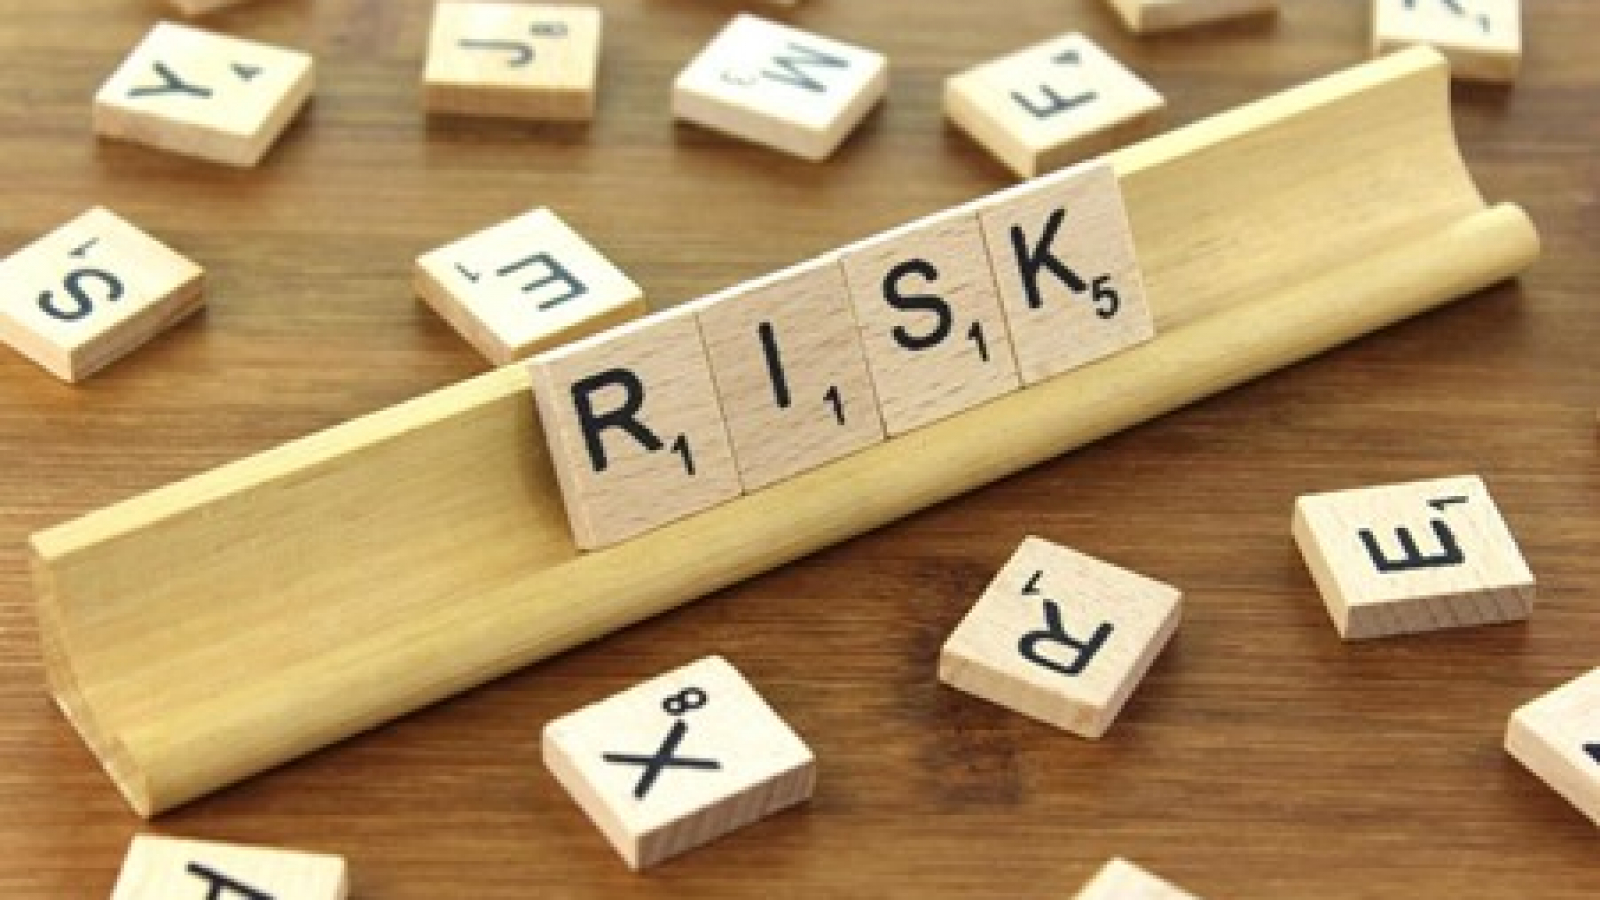 A picture showing the word risk made out of scrabble tiles